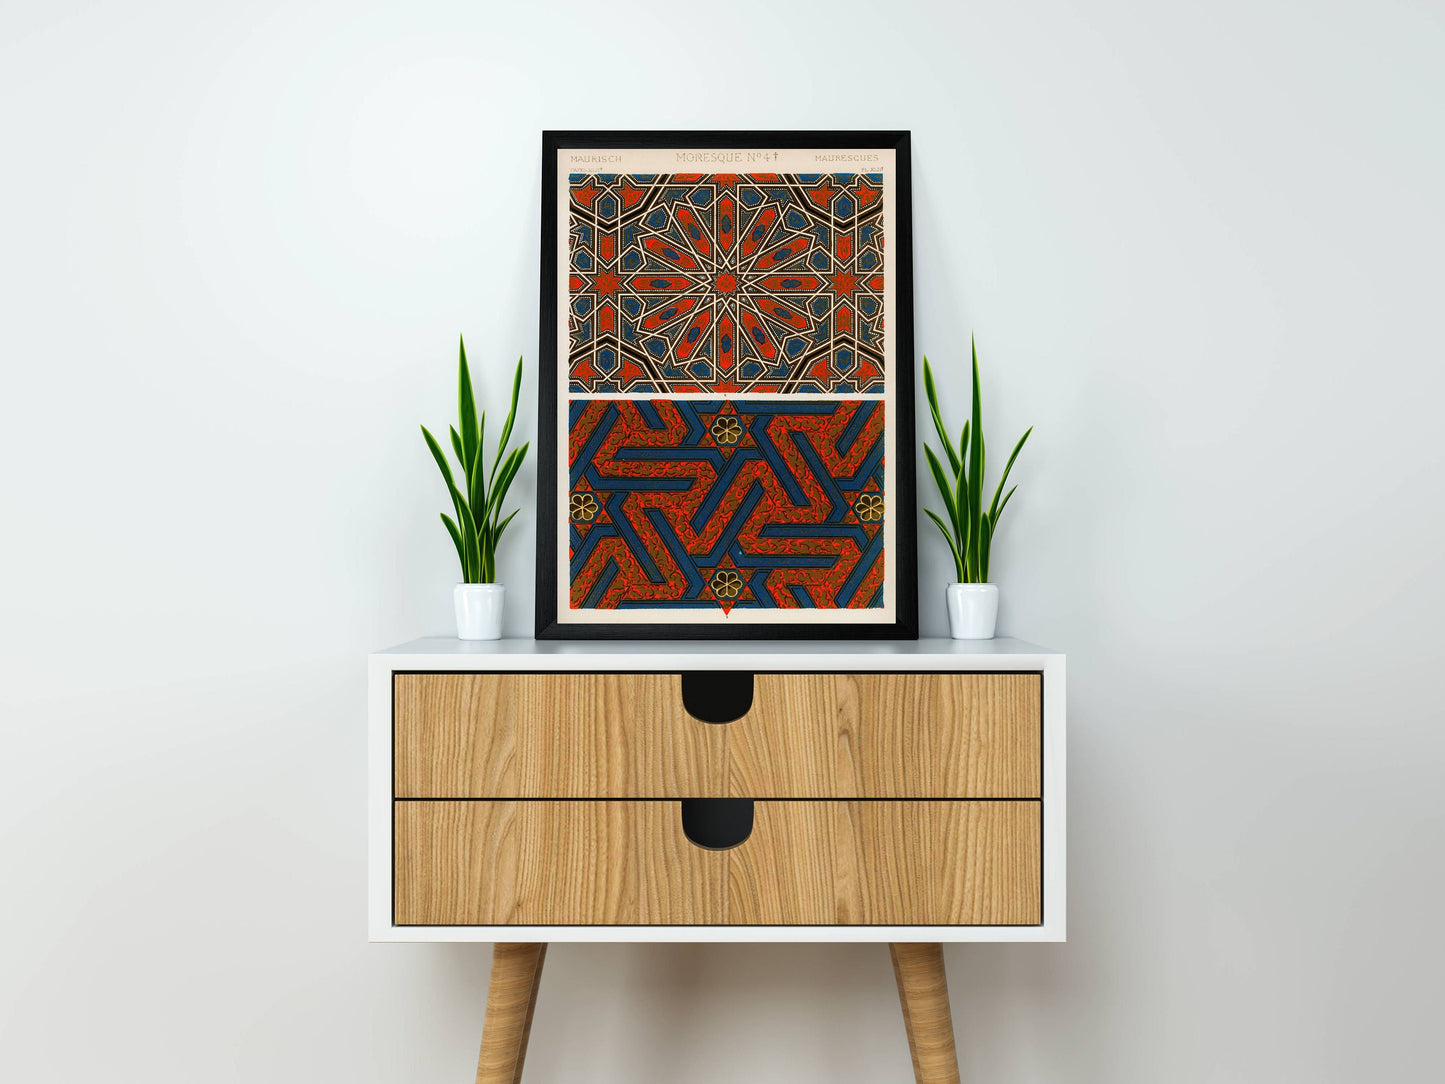 Abstract Pattern Art Illustration by Owen Jones Poster Print Wall Hanging Decor A4 A3 A2